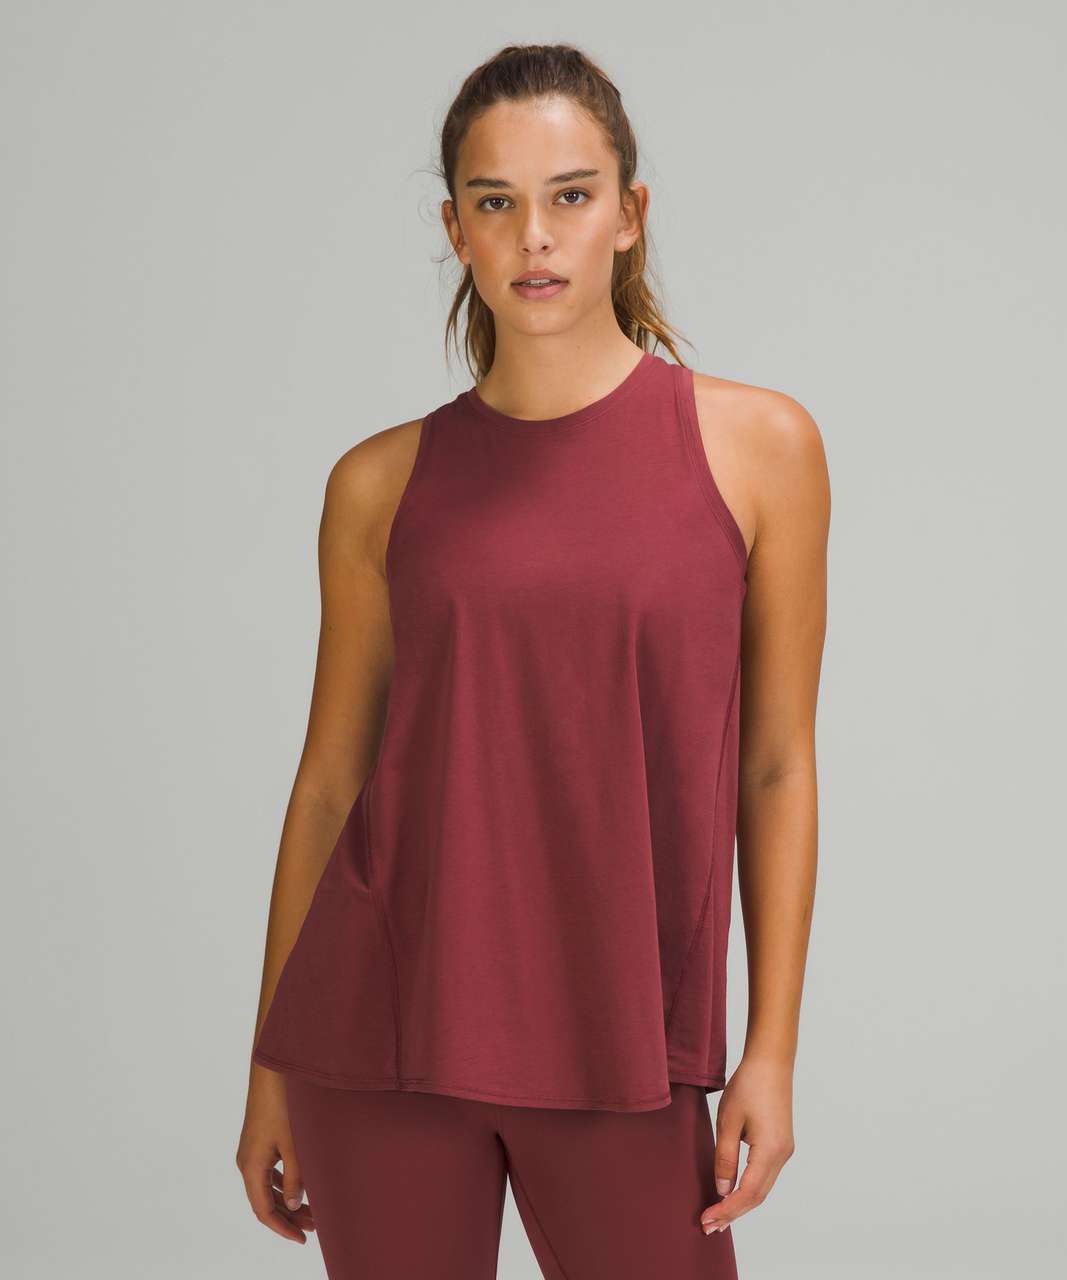 Lululemon All Tied Up Tank Top - Mulled Wine